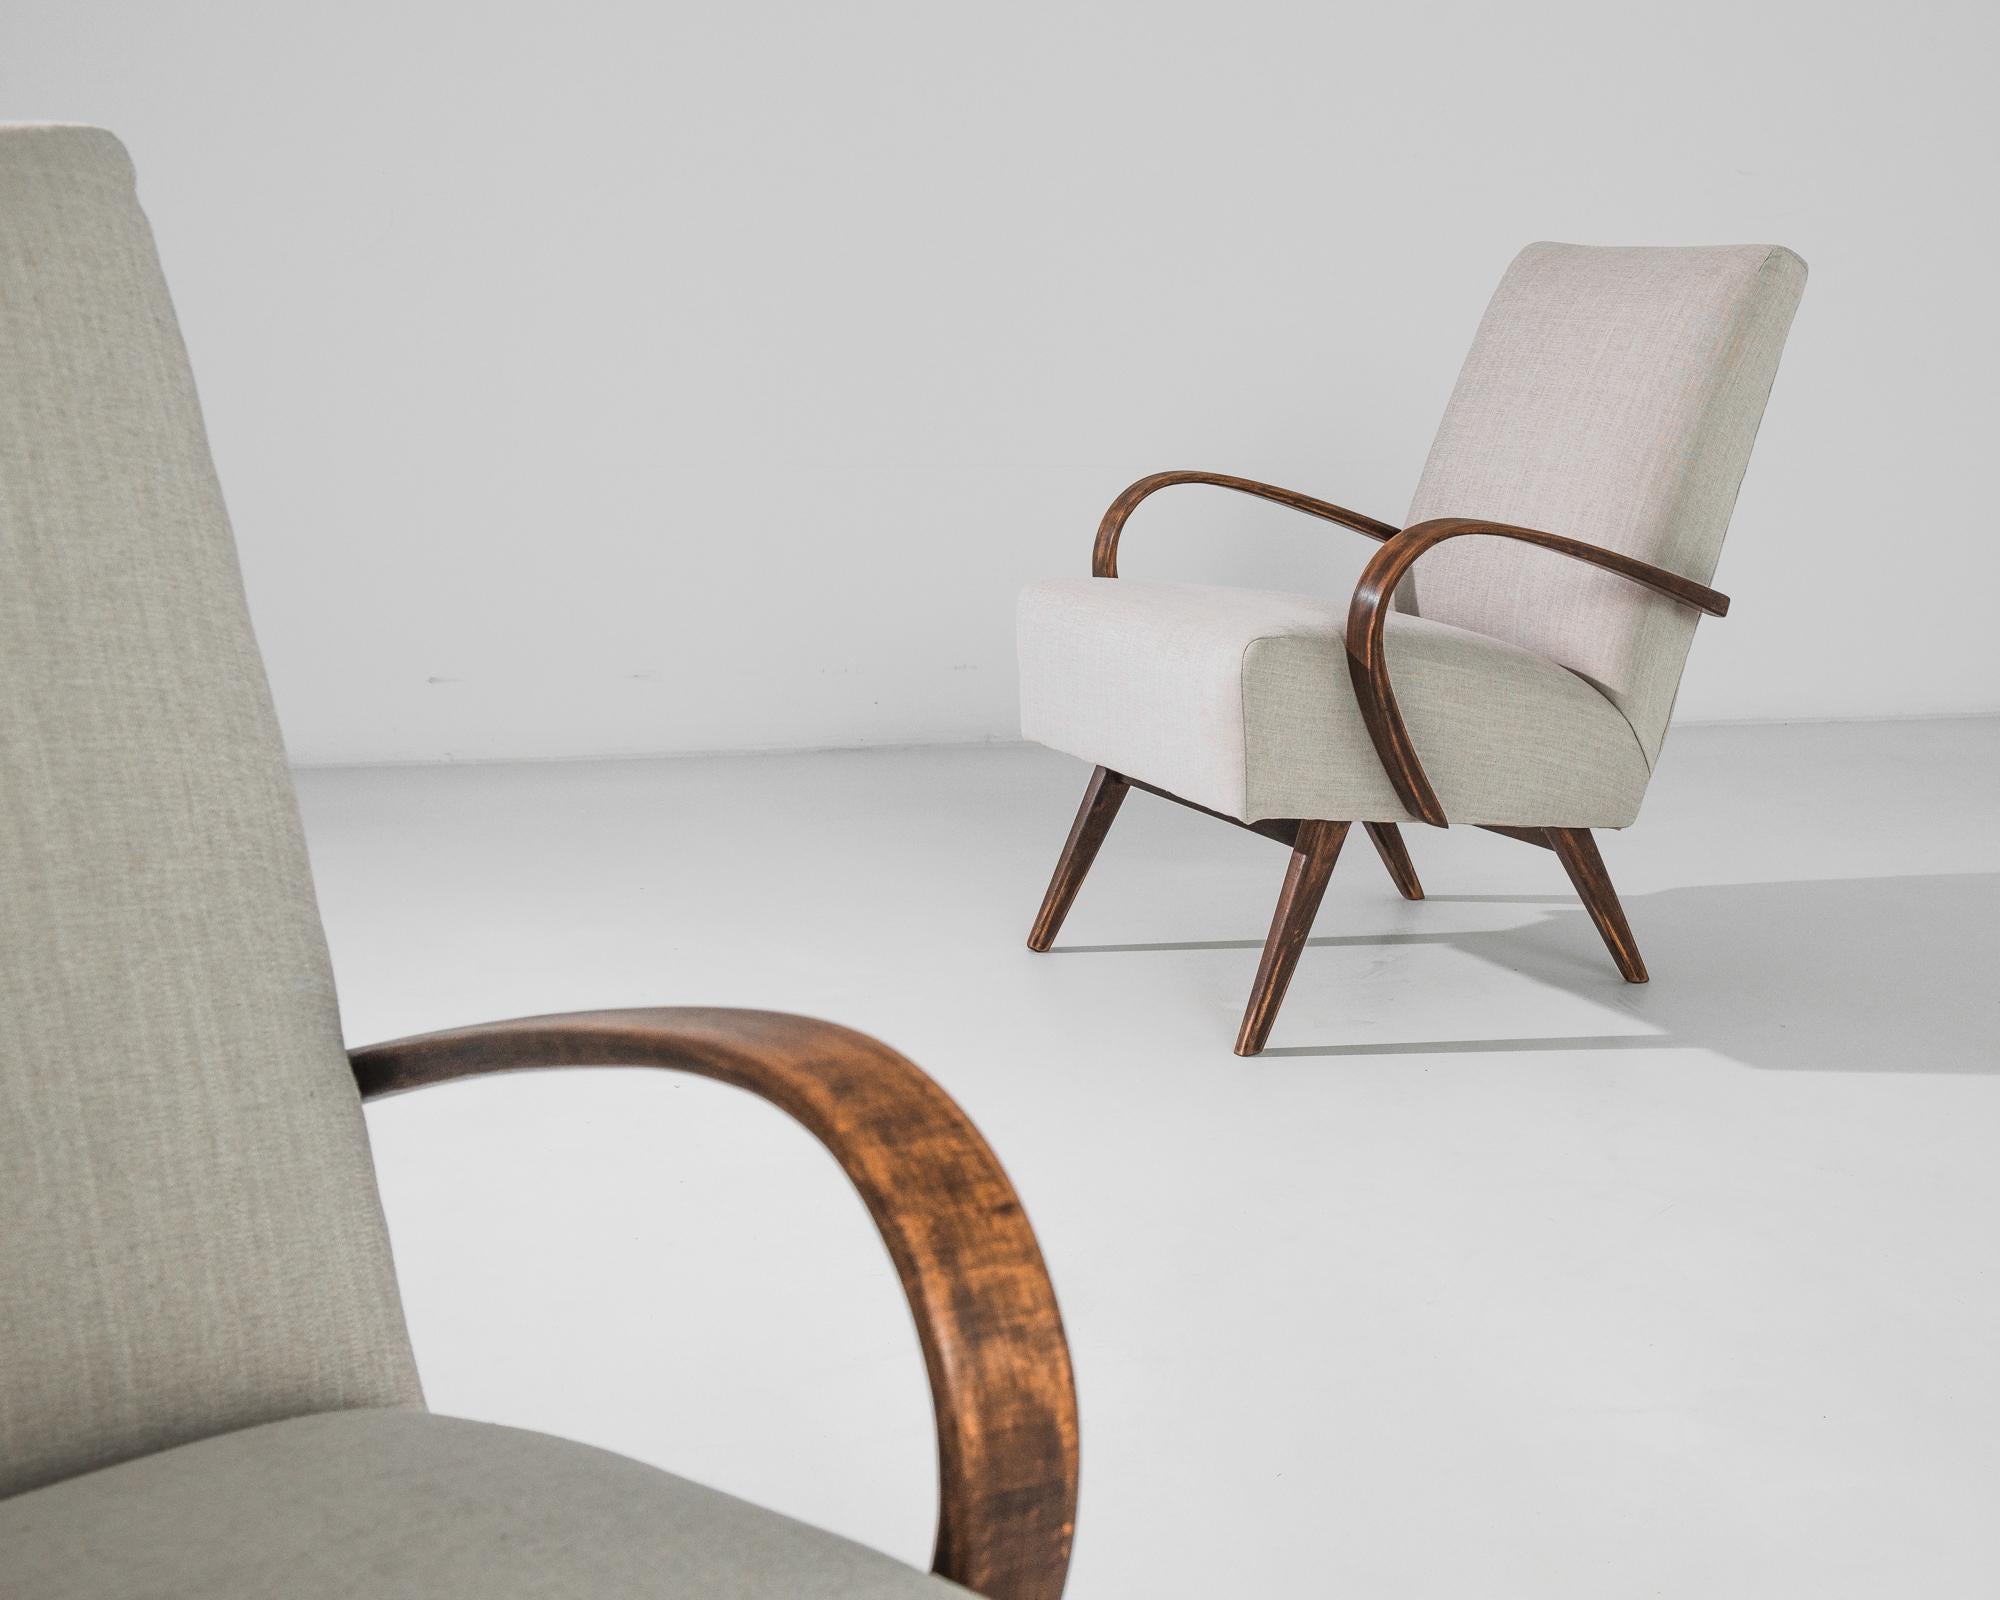 An armchair by Czech furniture designer Jindrich Halabala. This 1950s design is upholstered in an updated beige fabric, the neutral tone was chosen to compliment the natural brown of the hardwood frame. Influenced by Modern and Art Deco design, the